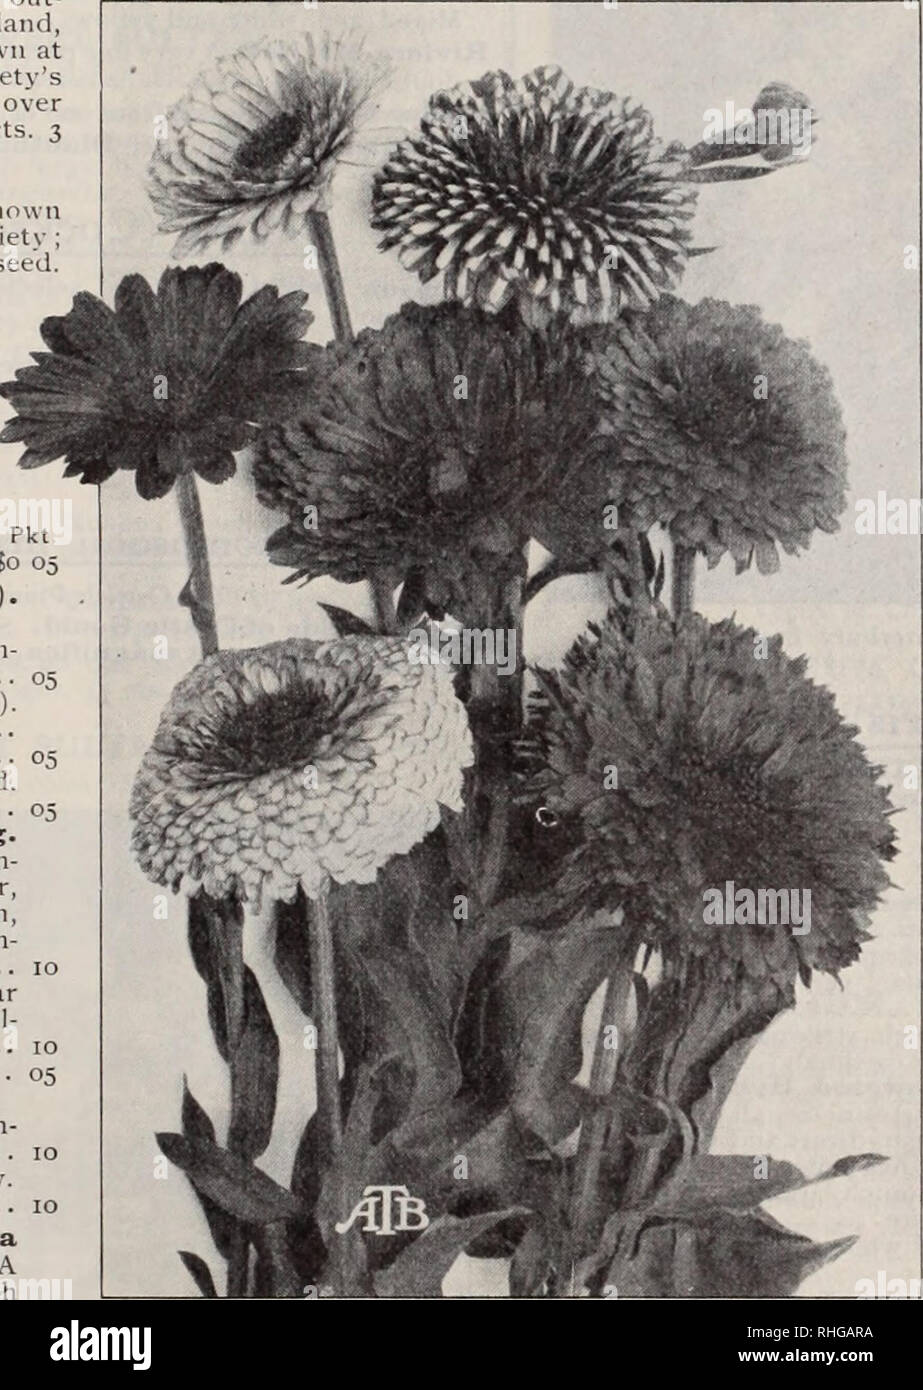 . Boddington's quality bulbs, seeds and plants / Arthur T. Boddington.. Nursery Catalogue. BODDINGTQN'S ^yU4x£i€V SEELVS 19 Calceolaria Hybrida, Boddington's Perfection The herbaceous Calceolaria is an easily cultivated plant. So long as frost is excluded from the plants in winter they are perfectly safe, and to attempt to hasten grovvtli at any time is a failure. Julv is the best month for sowing the seed. The grtat advance made in the habit of the strains offered is remarkable, wliilst in the colors there is a marked improvement. Saved by England's most famous spe- cialists. Monster flowers  Stock Photo